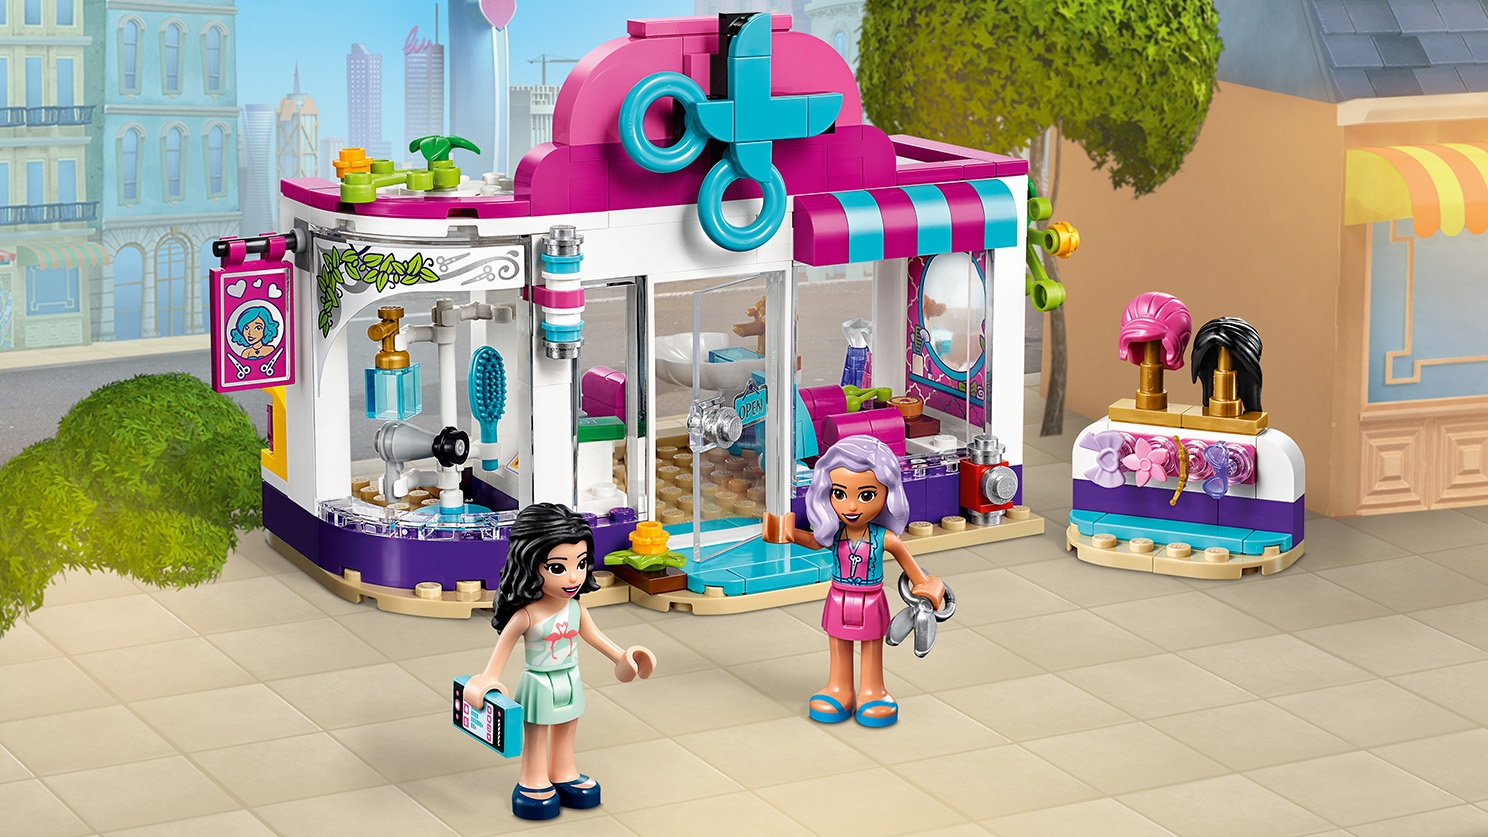 LEGO Friends Heartlake City Play Hair Salon Fun Toy 41391 Building Kit Featuring Friends Character Emma New 2020 235 Pieces 